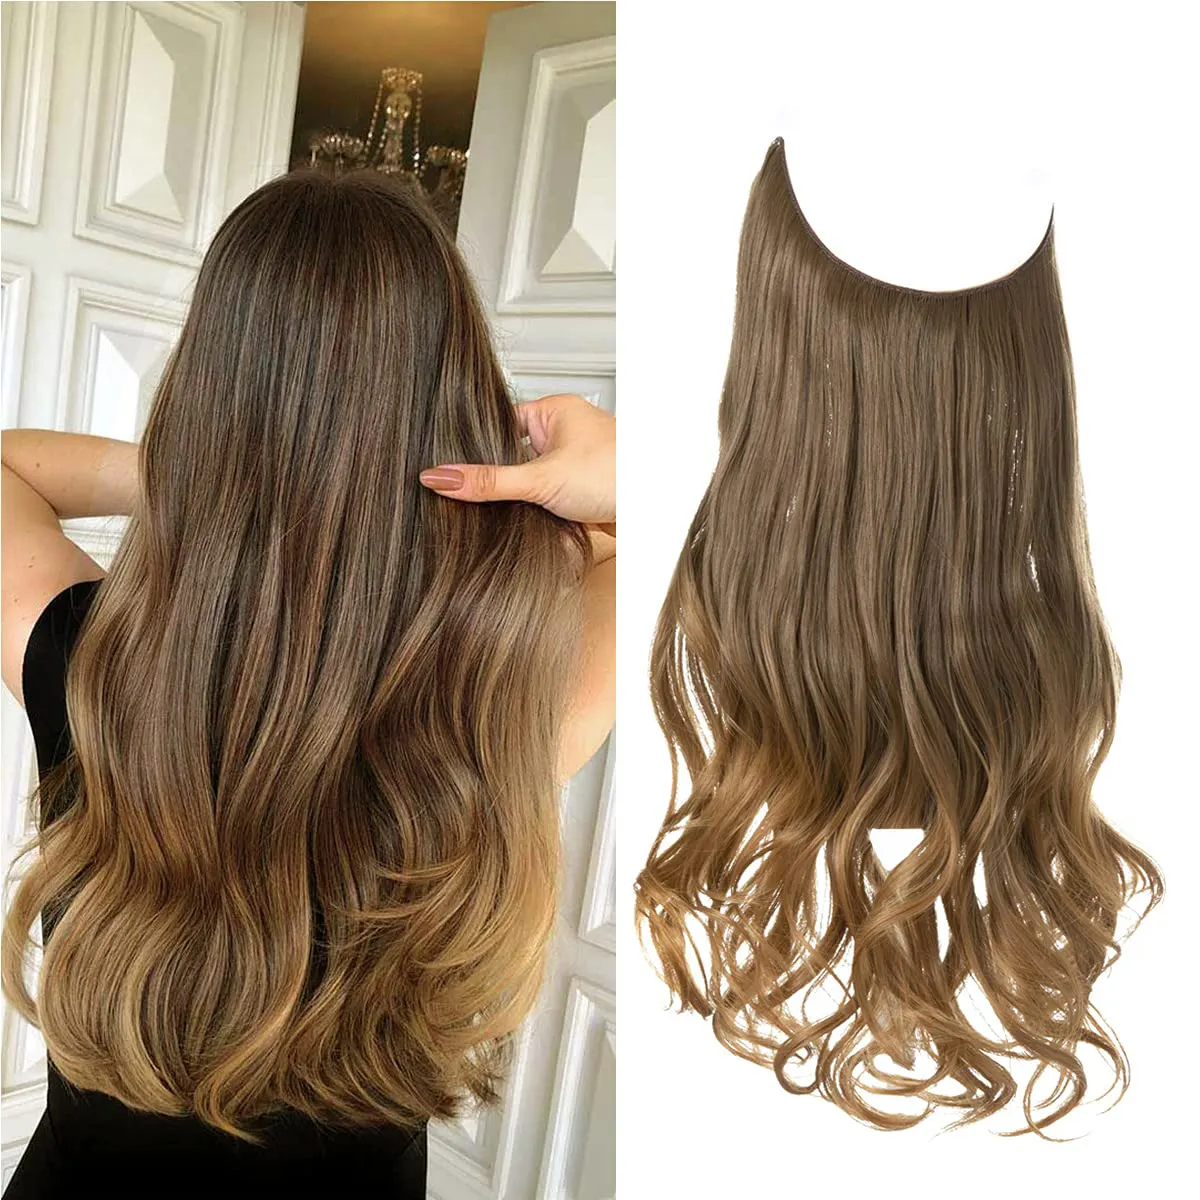 Wholesale Hair Extensions Ombre Brown Golden Wavy Curly Virgin Plus Remy Raw Brazilian Human Halo Hair Extensions With Clips